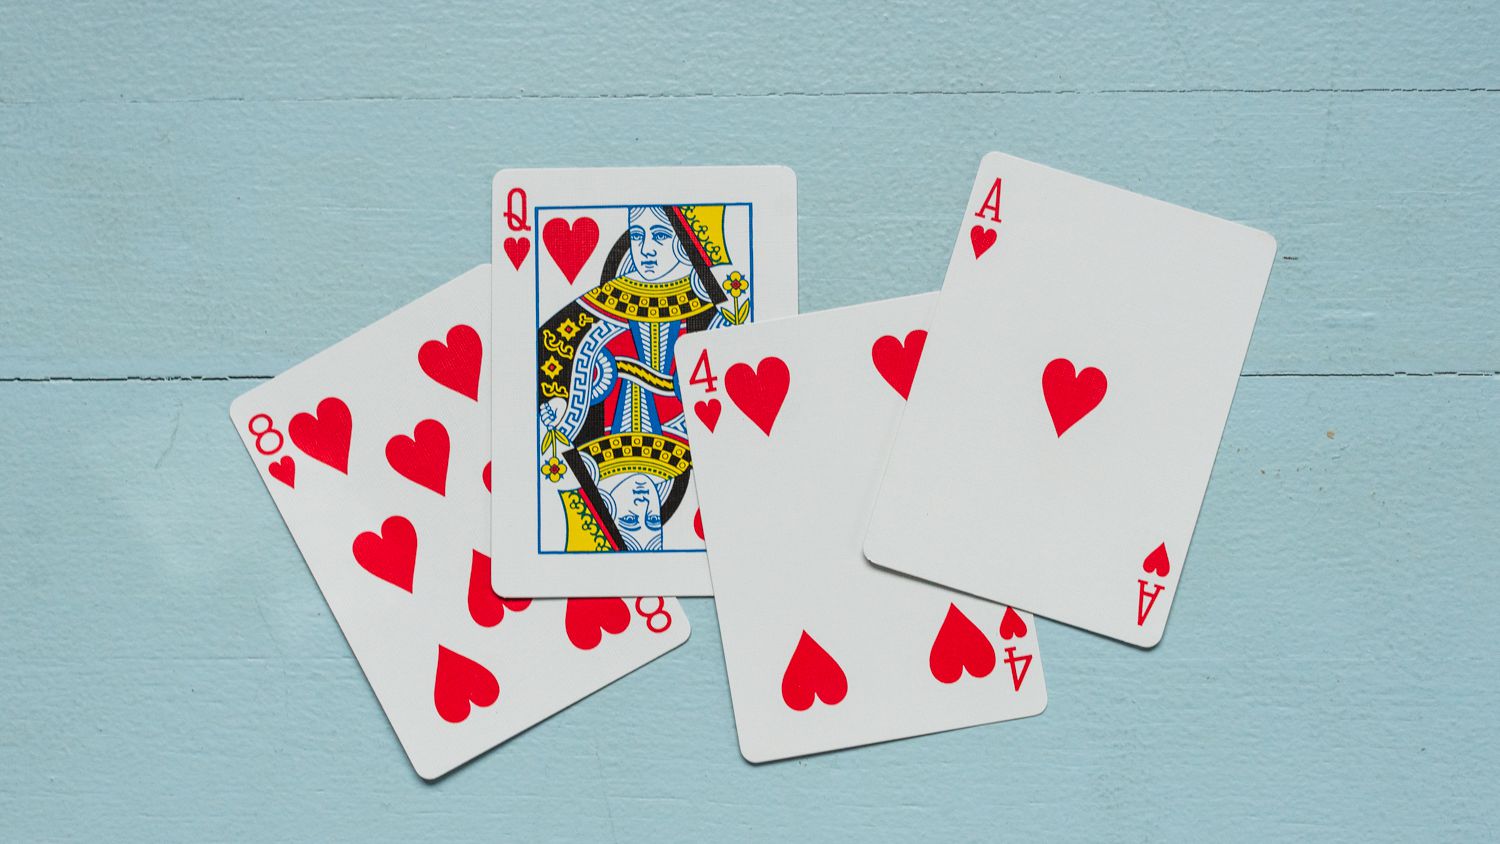 free hearts card game no download required